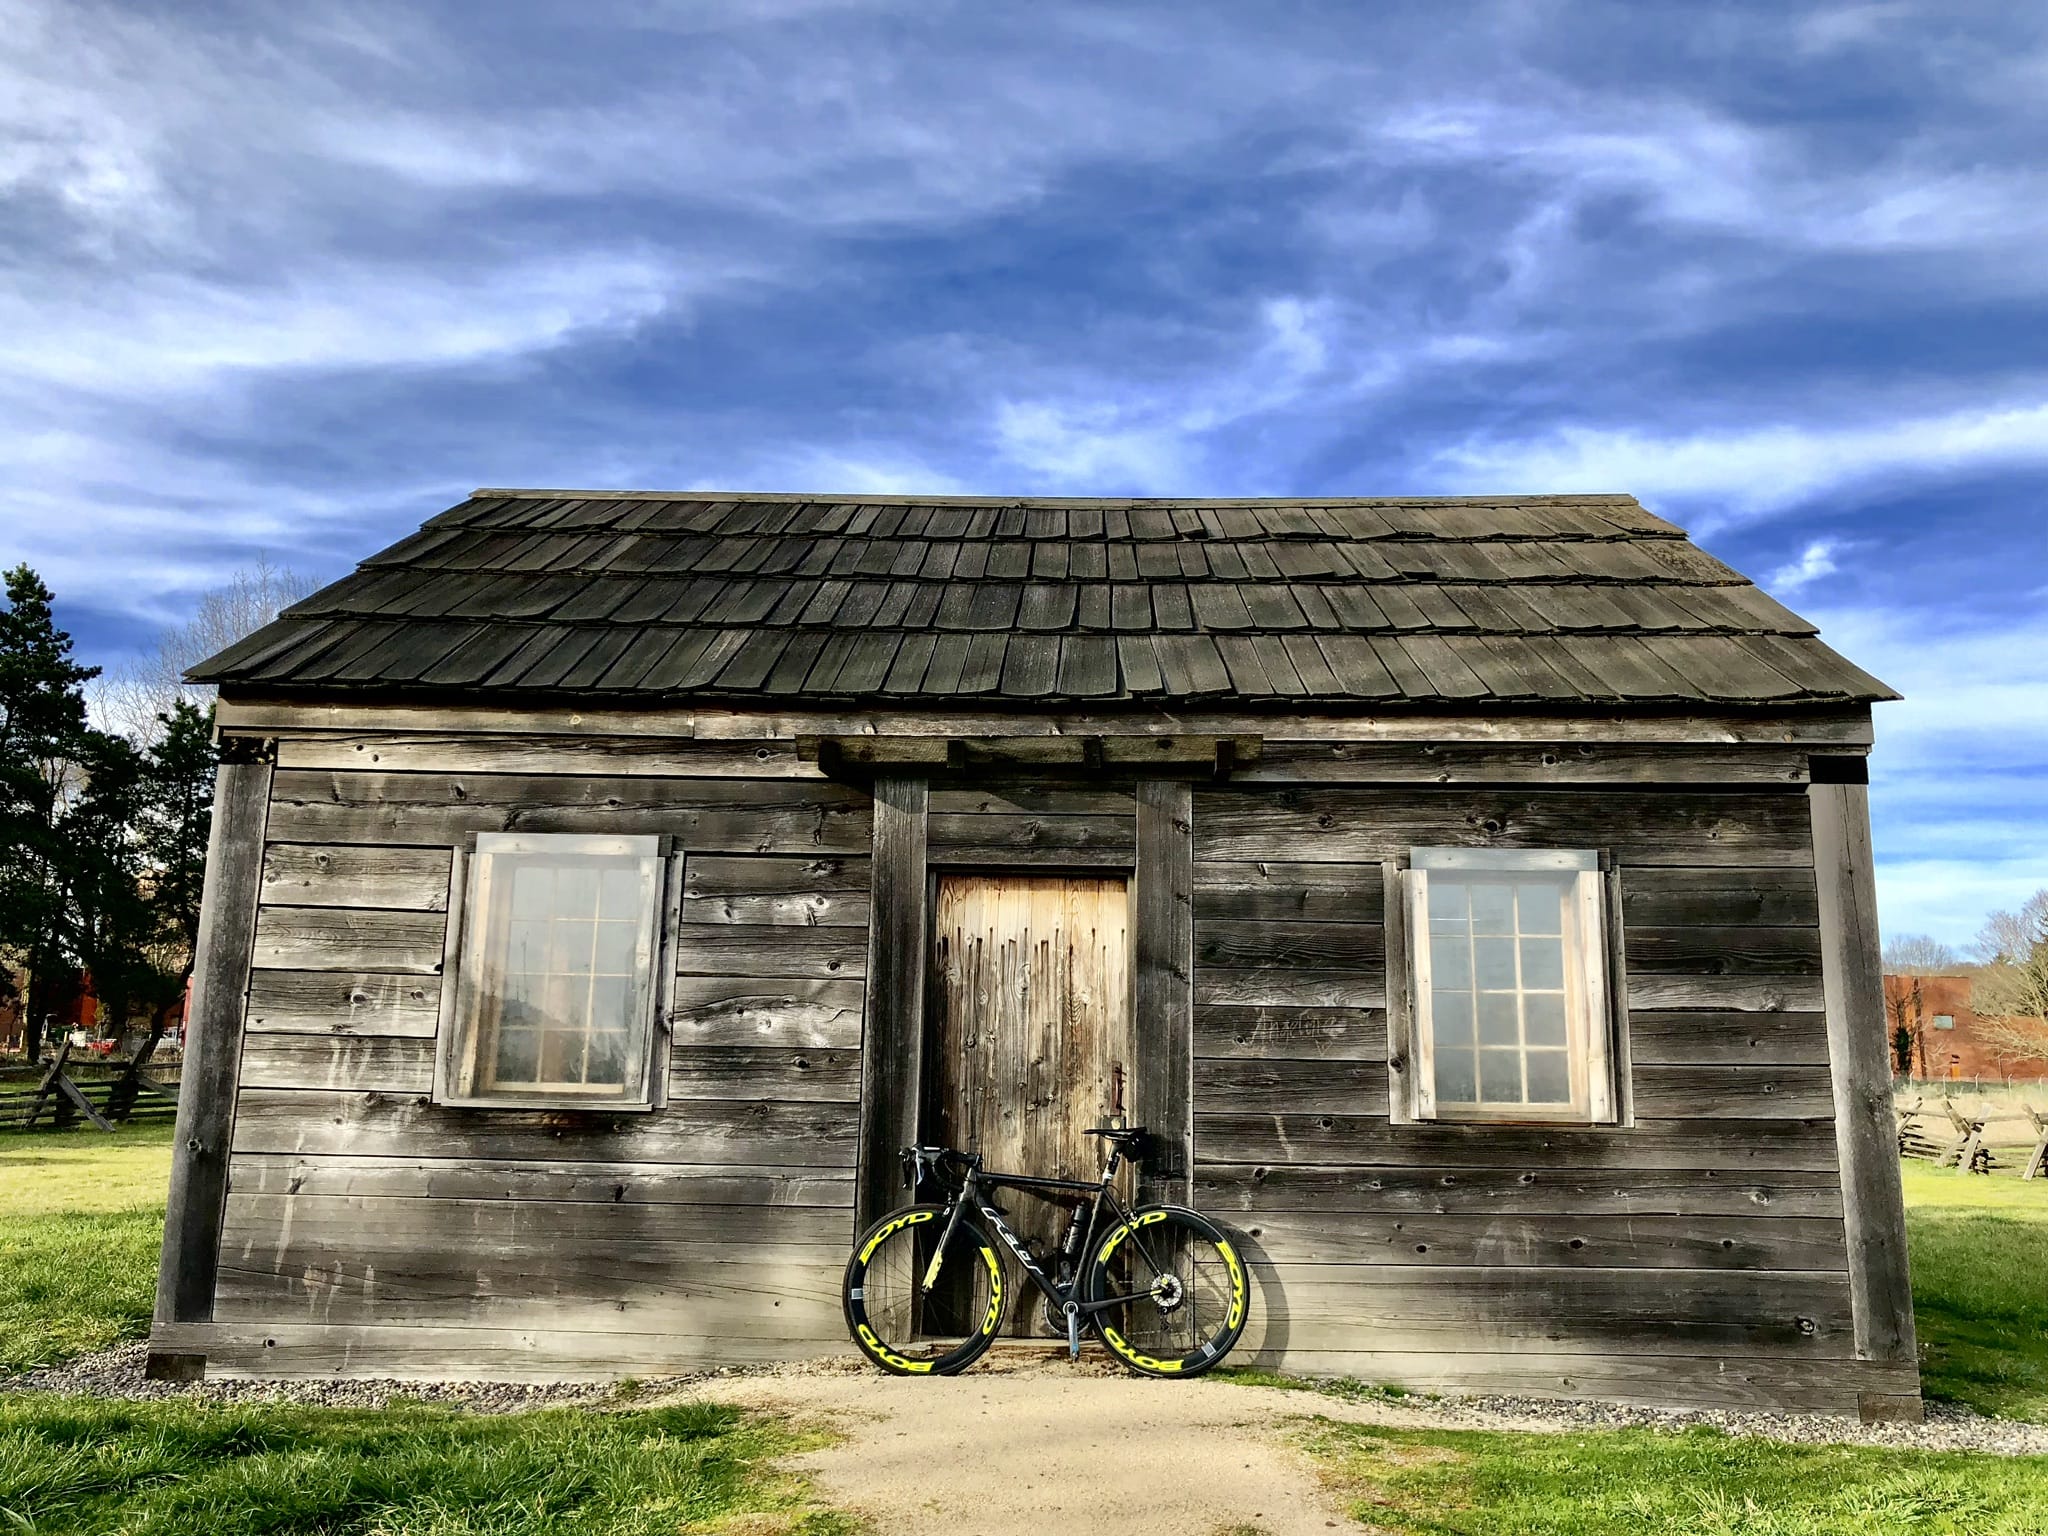 Spring at the Fort Vancouver national historic site.